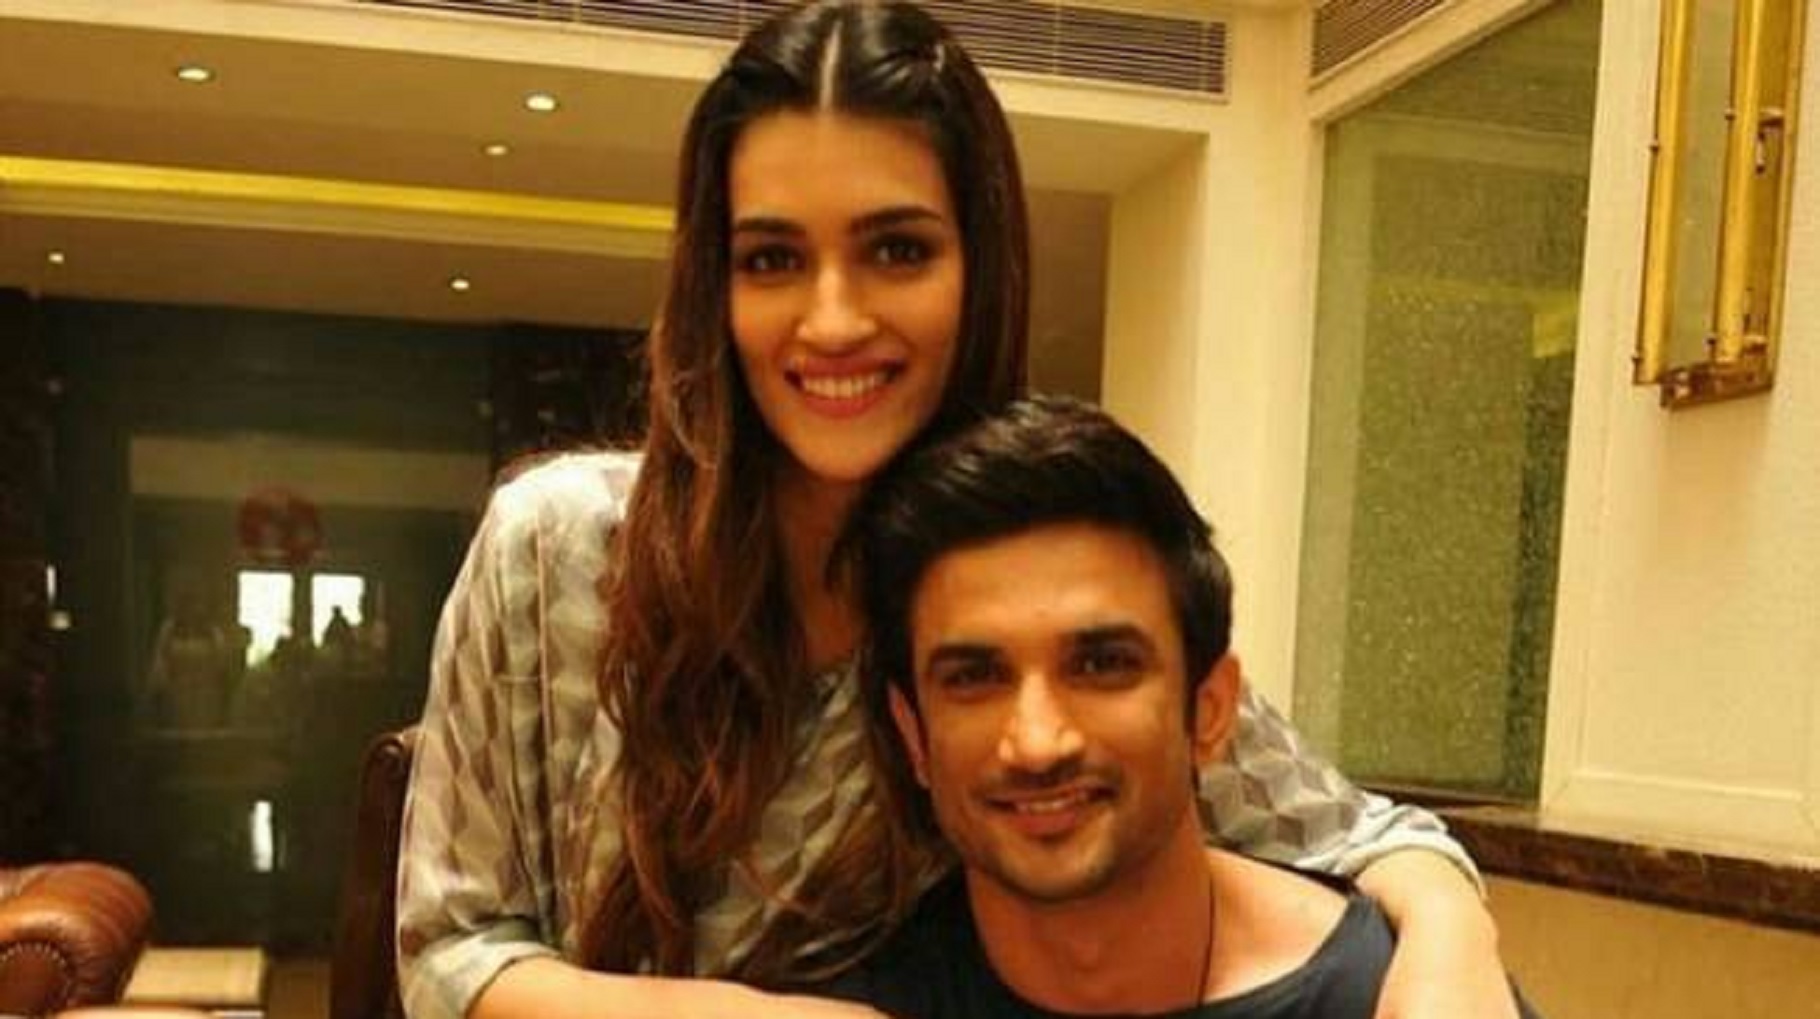 Kriti Sanon Says She Remained Silent On SSR’s Death as She ‘Didn’t Want To Be Part of Negativity’